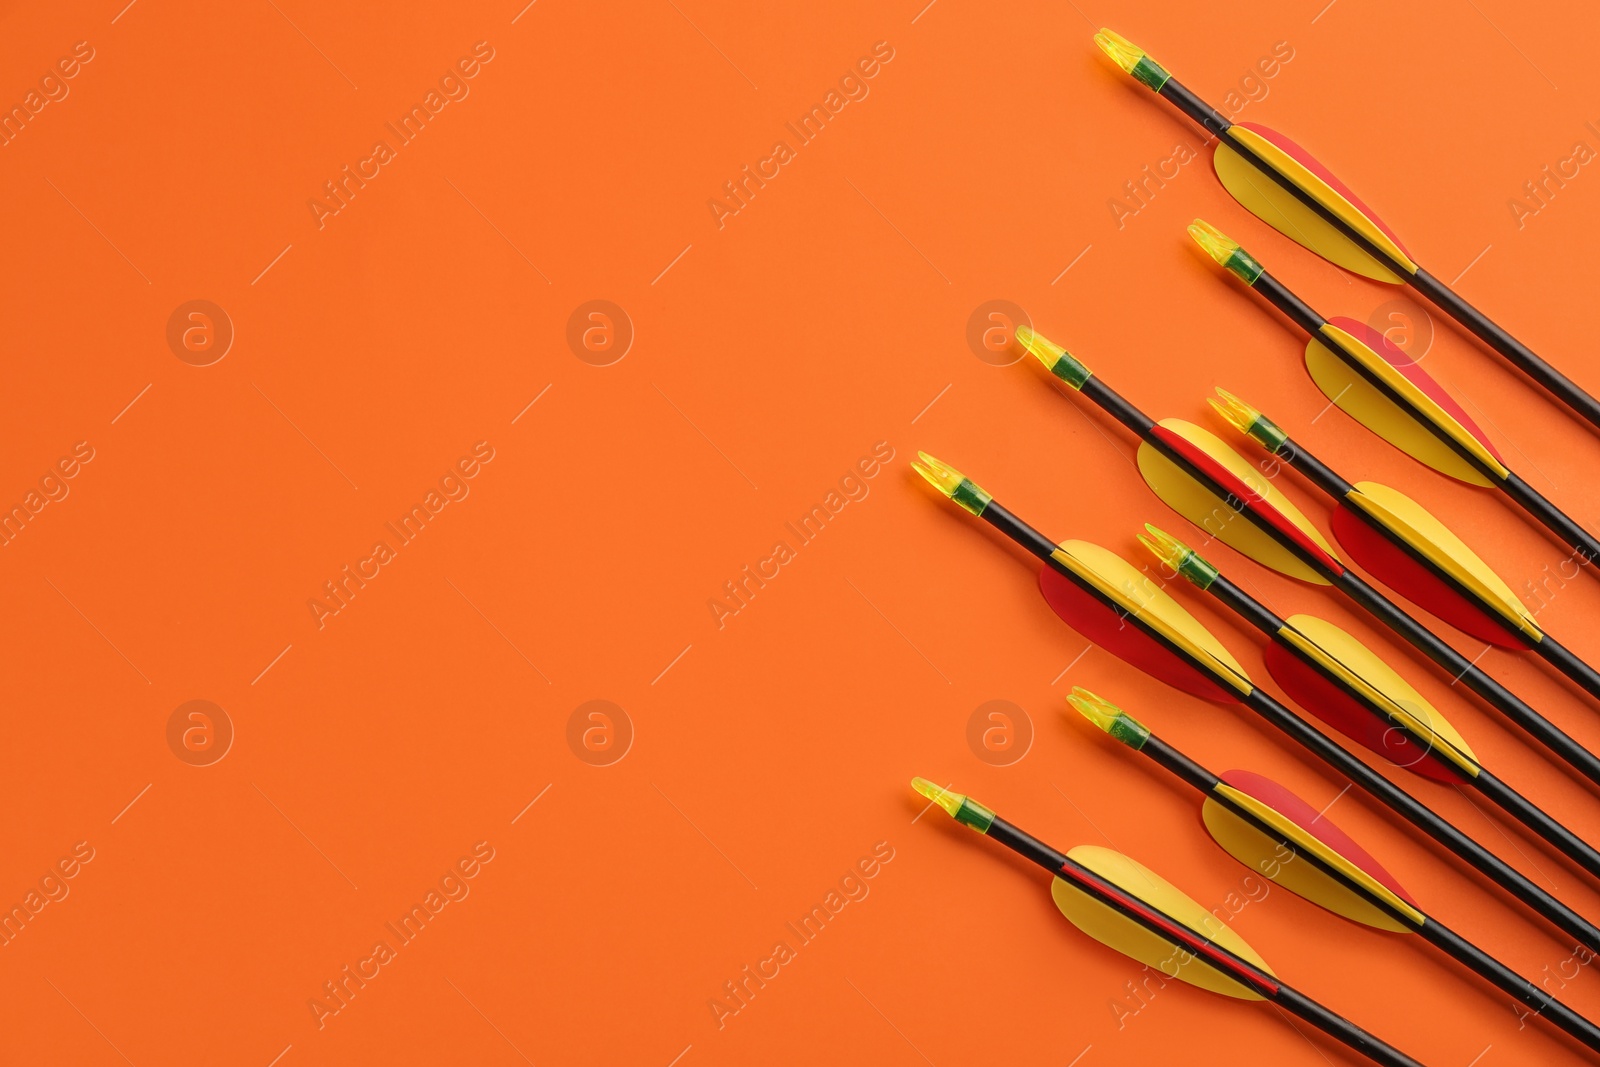 Photo of Plastic arrows on orange background, flat lay with space for text. Archery sports equipment